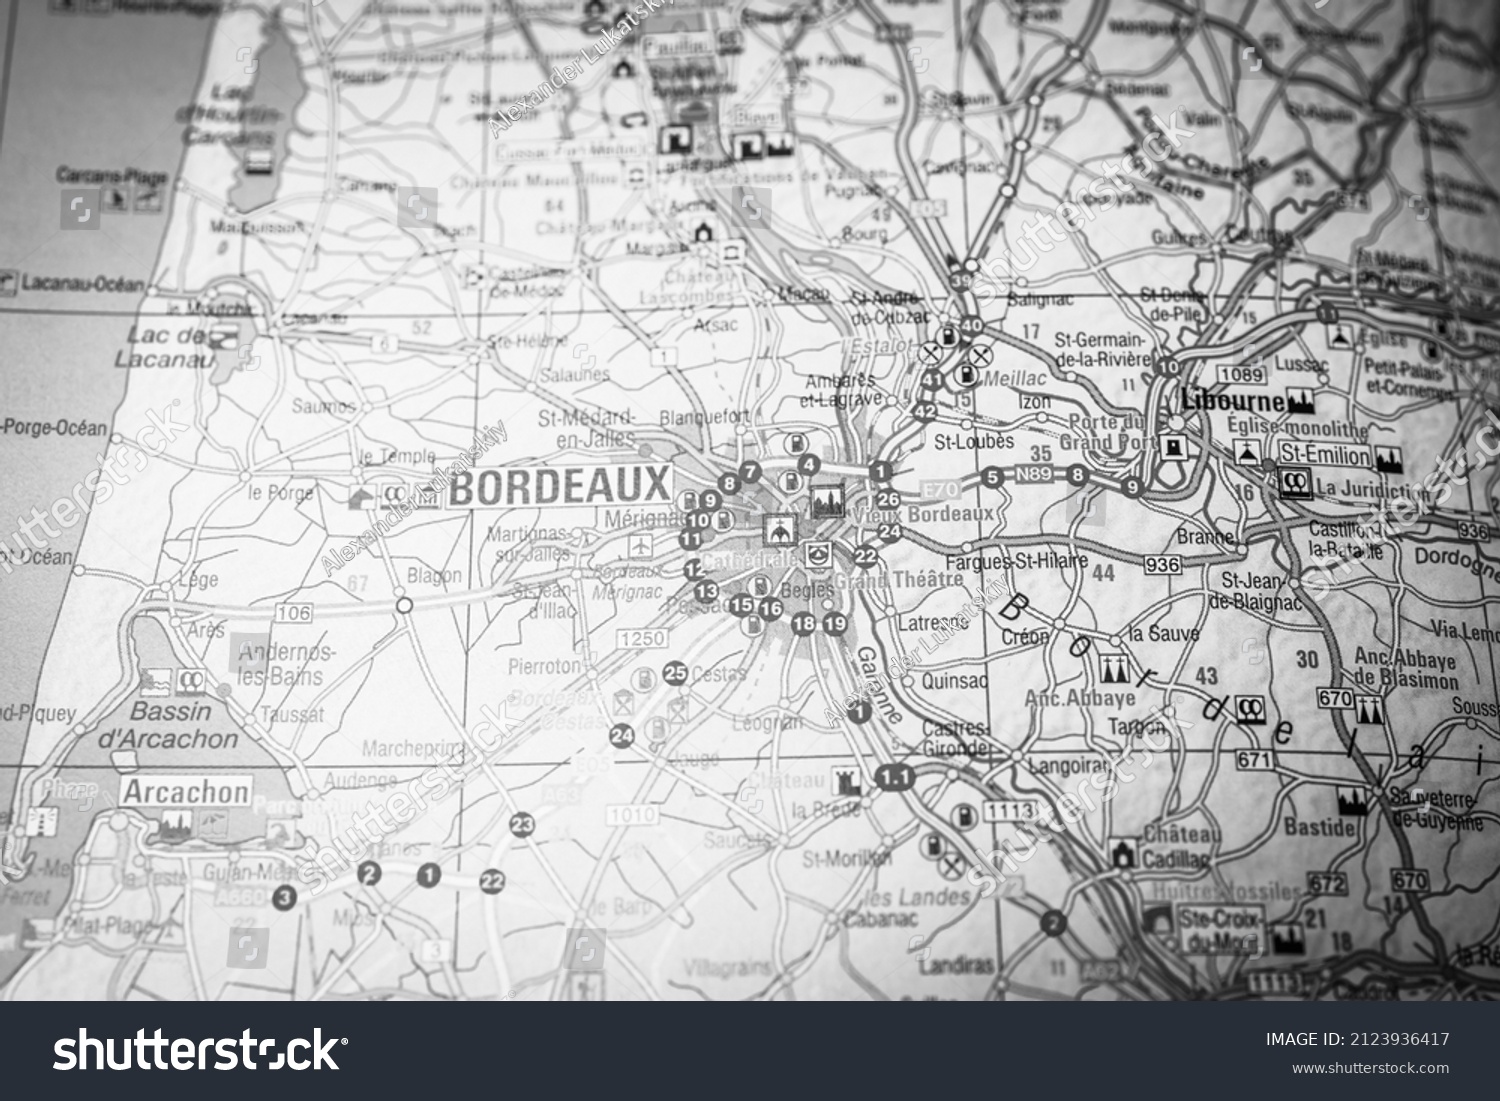 Stock Photo Bordeaux On The Europe Map 2123936417 